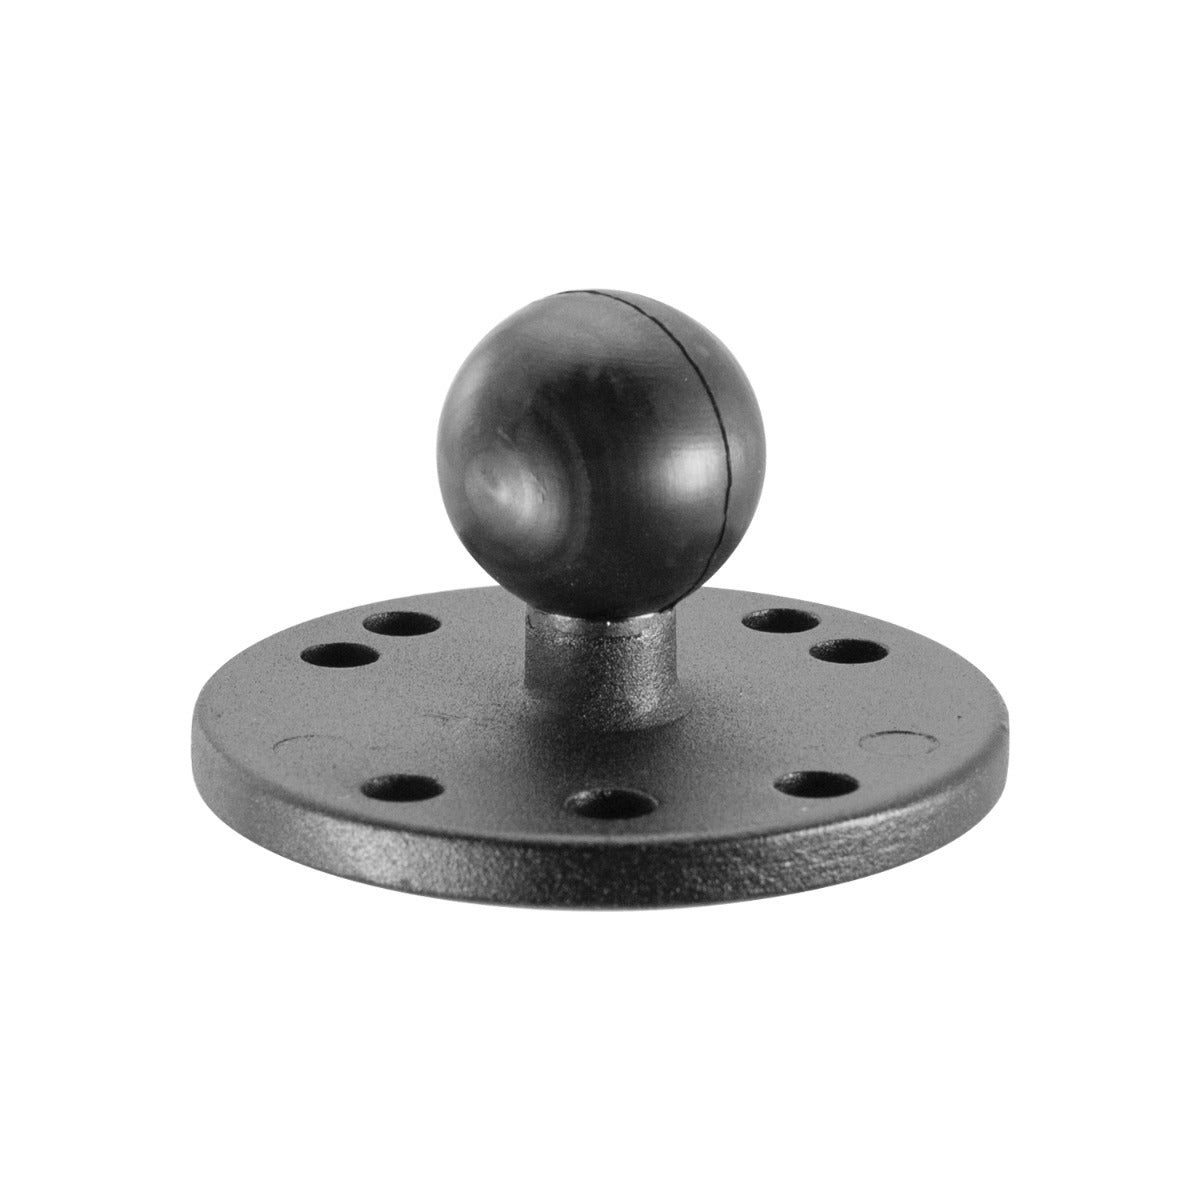 iBOLT™ 25mm / 1 inch Metal AMPS Round Adapter Plate